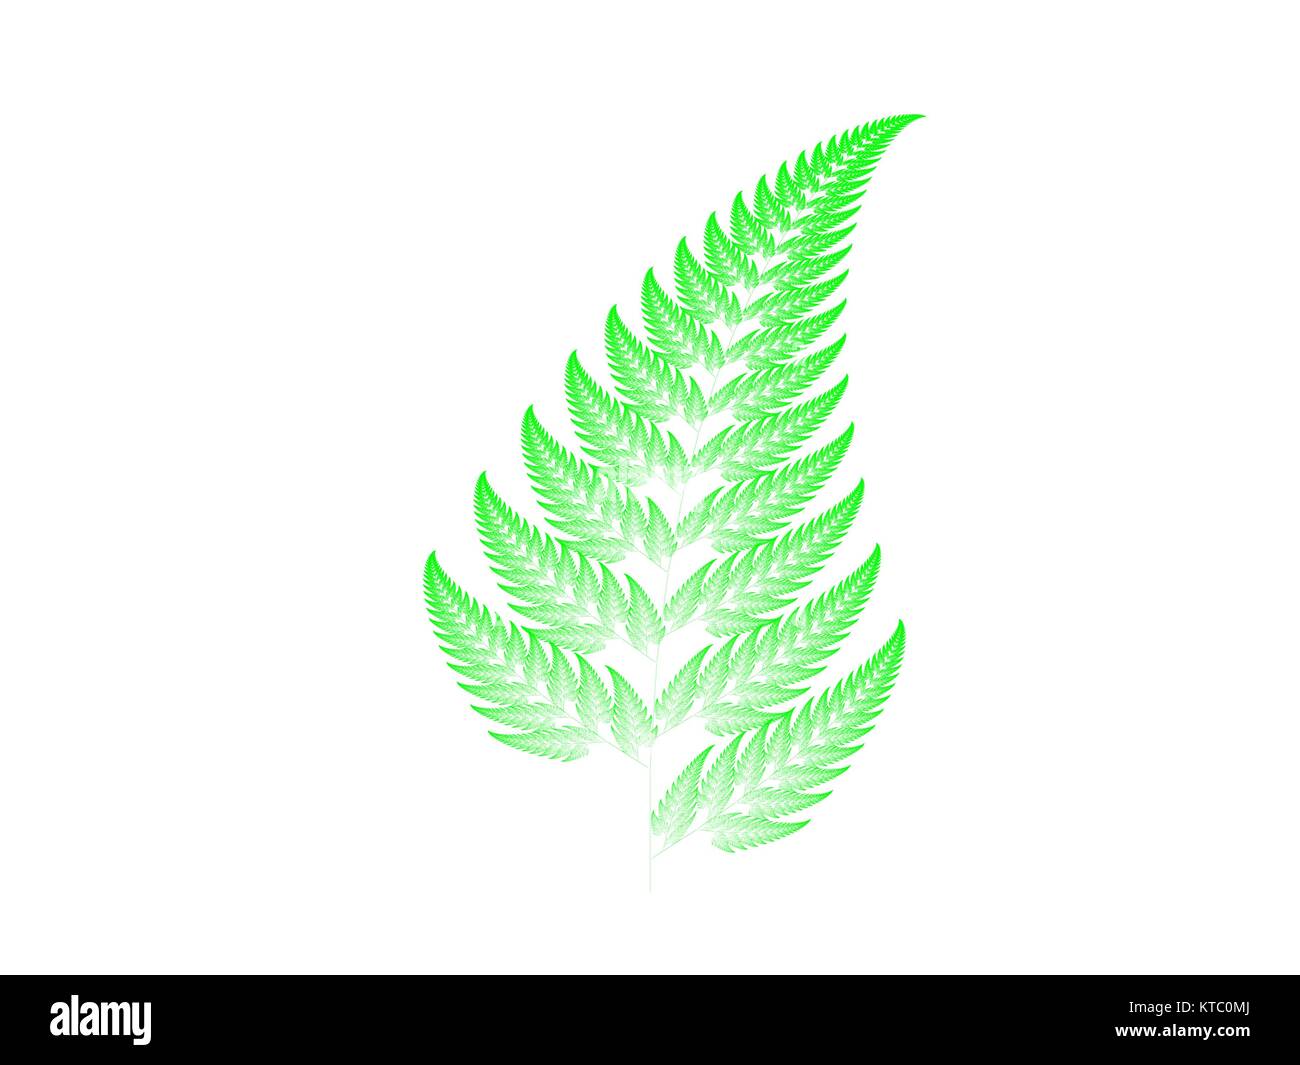 Green fractal background Stock Photo